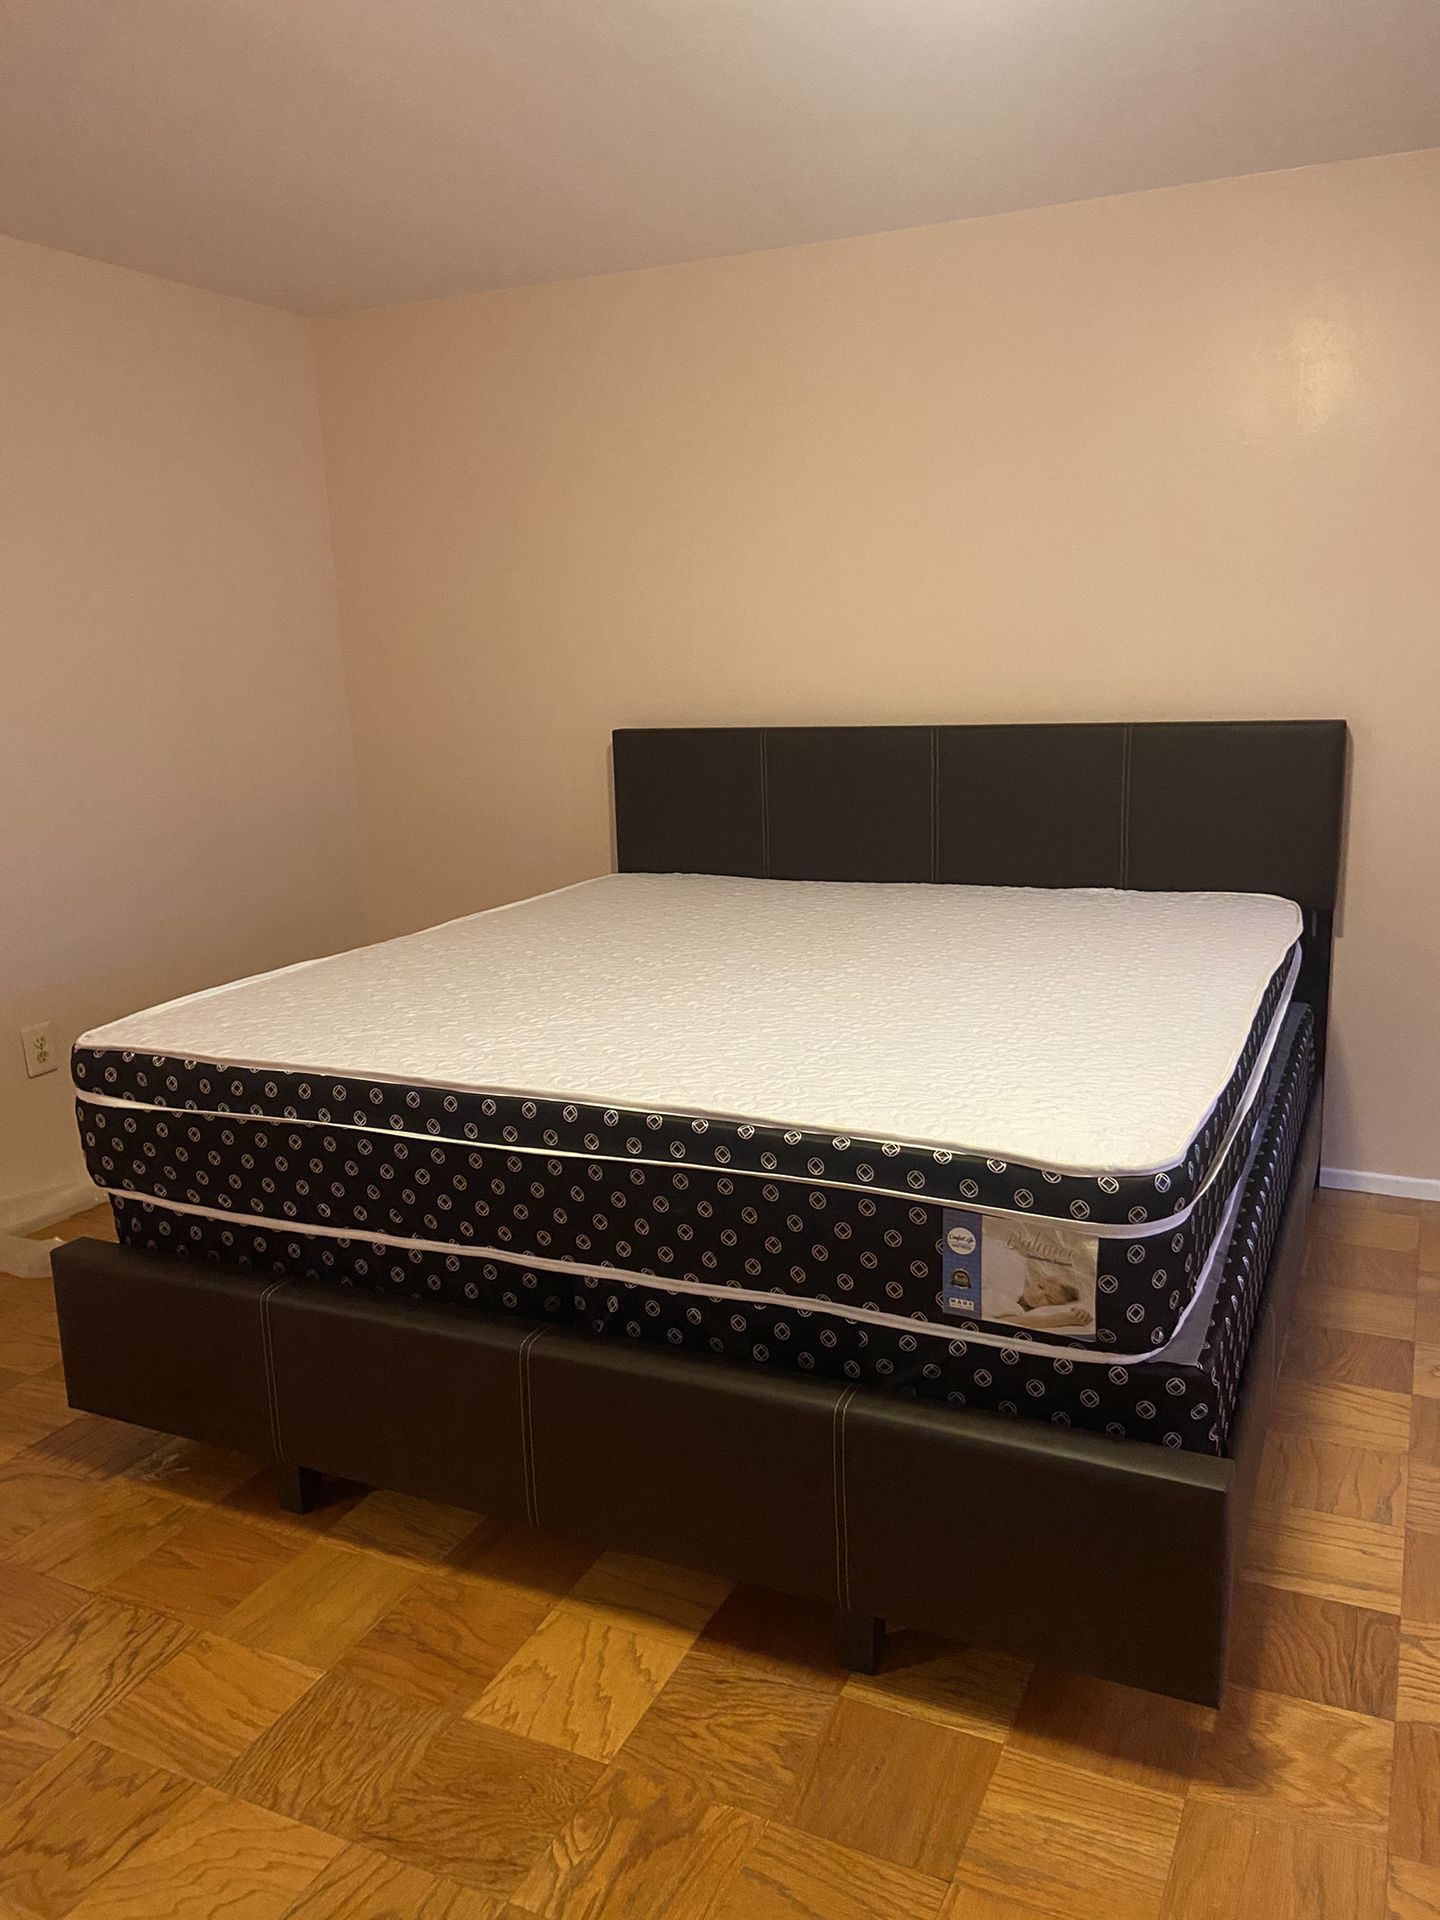 Queen Mattress Come With Bed 🛏️ Frame And Free Box Spring - Free Delivery 🚚 Today To Reasonable Distance 